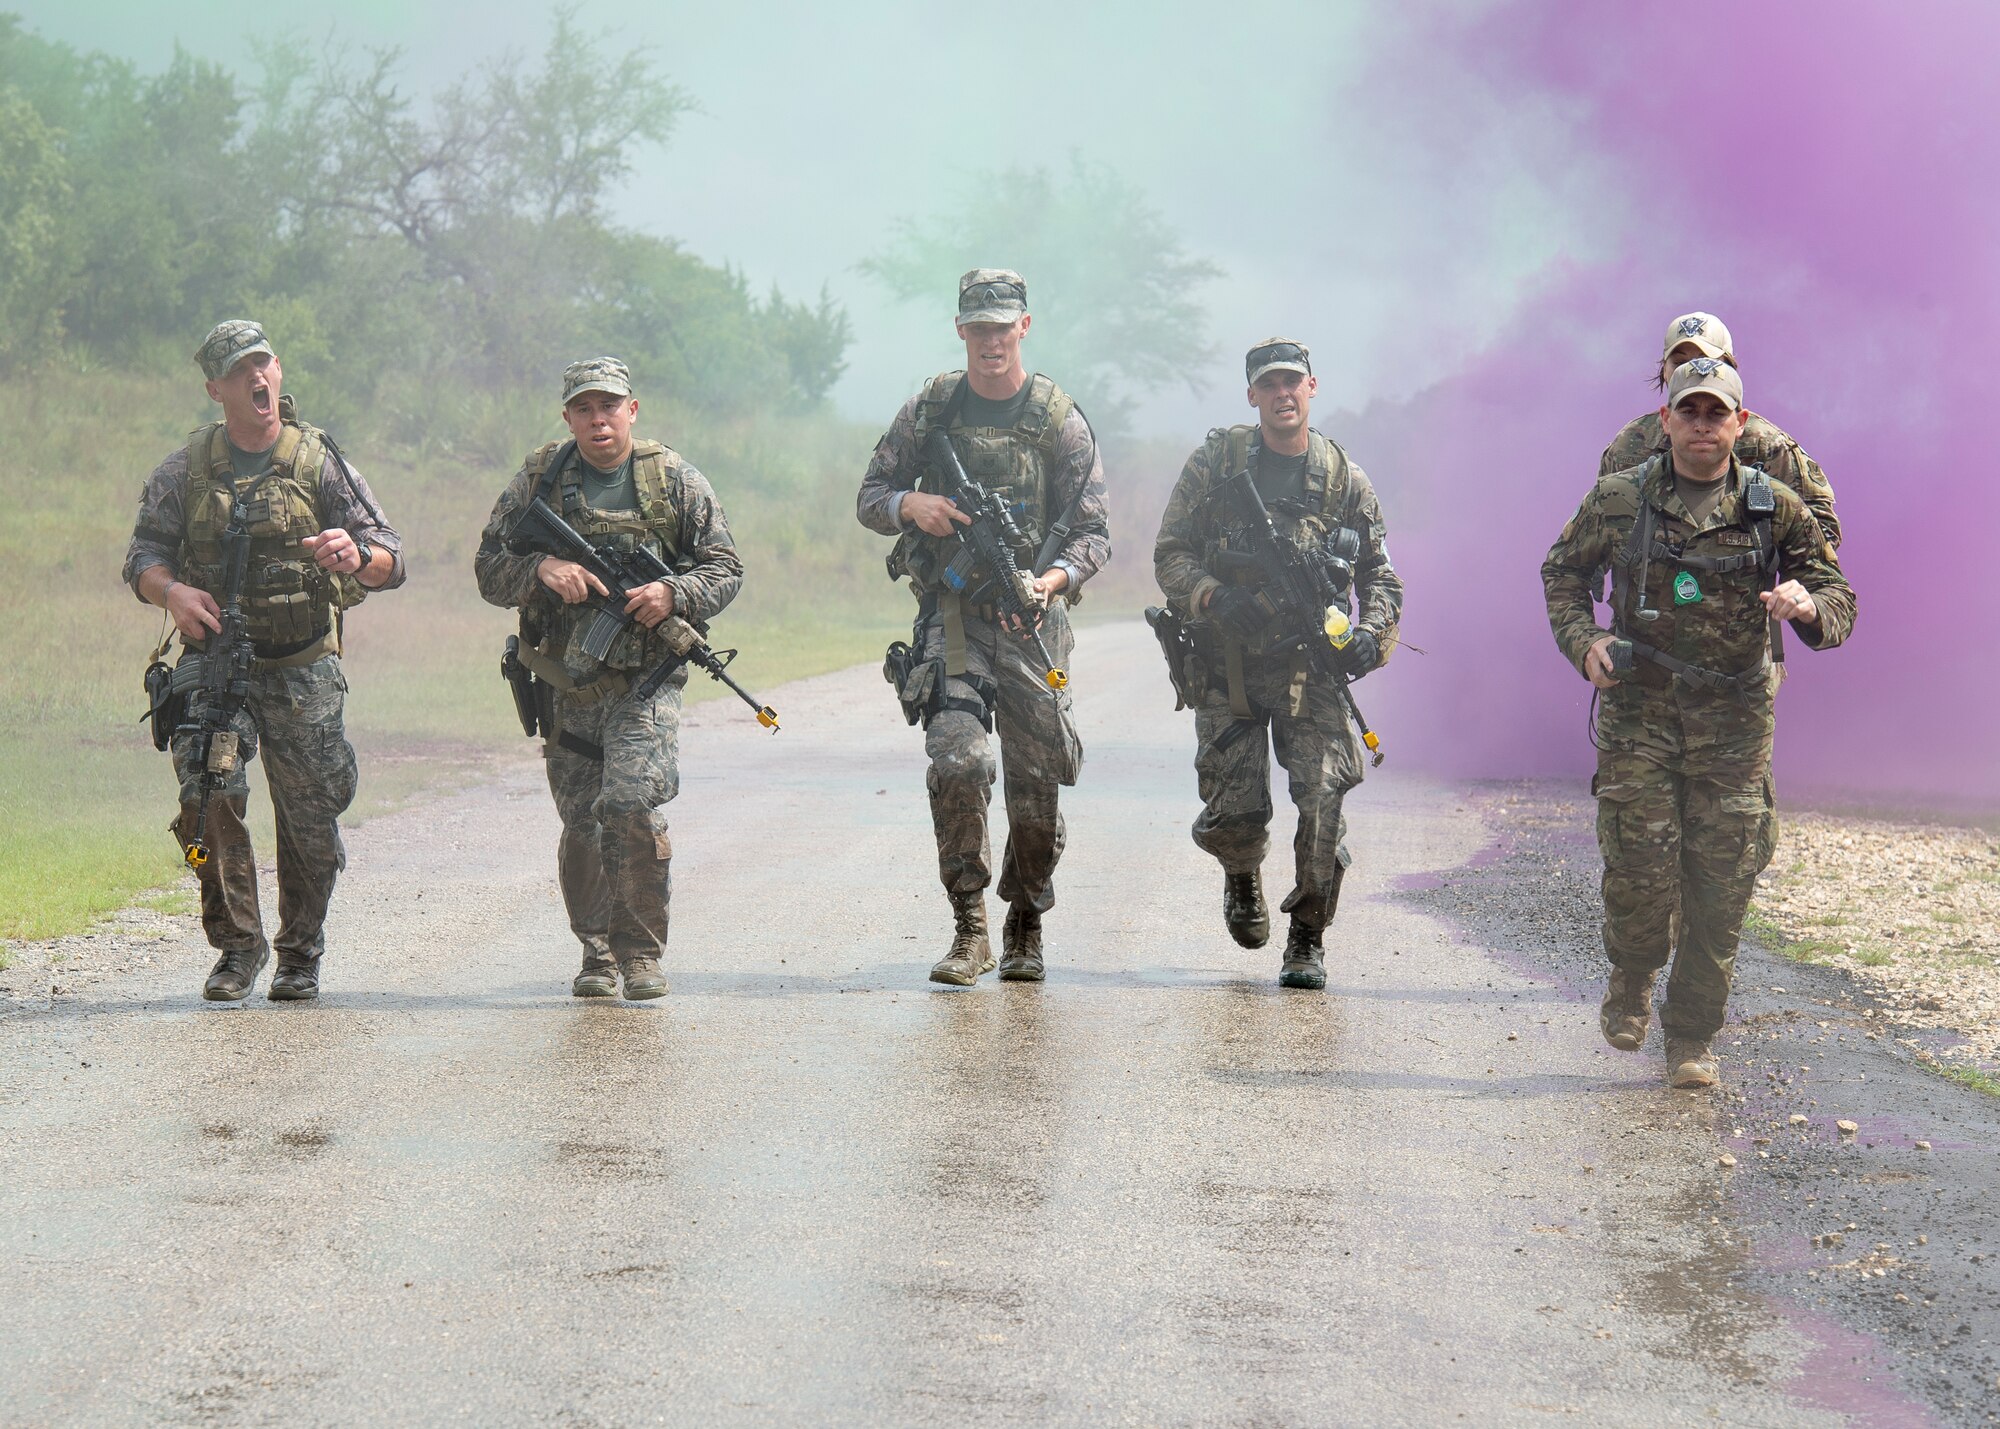 Airmen from the Air National Guard Air Force Defender’s Challenge Team 2018 run to the finish line of the dismounted operations portion of the competition at Camp Bullis, San Antonio, Texas, on Sept. 12, 2018